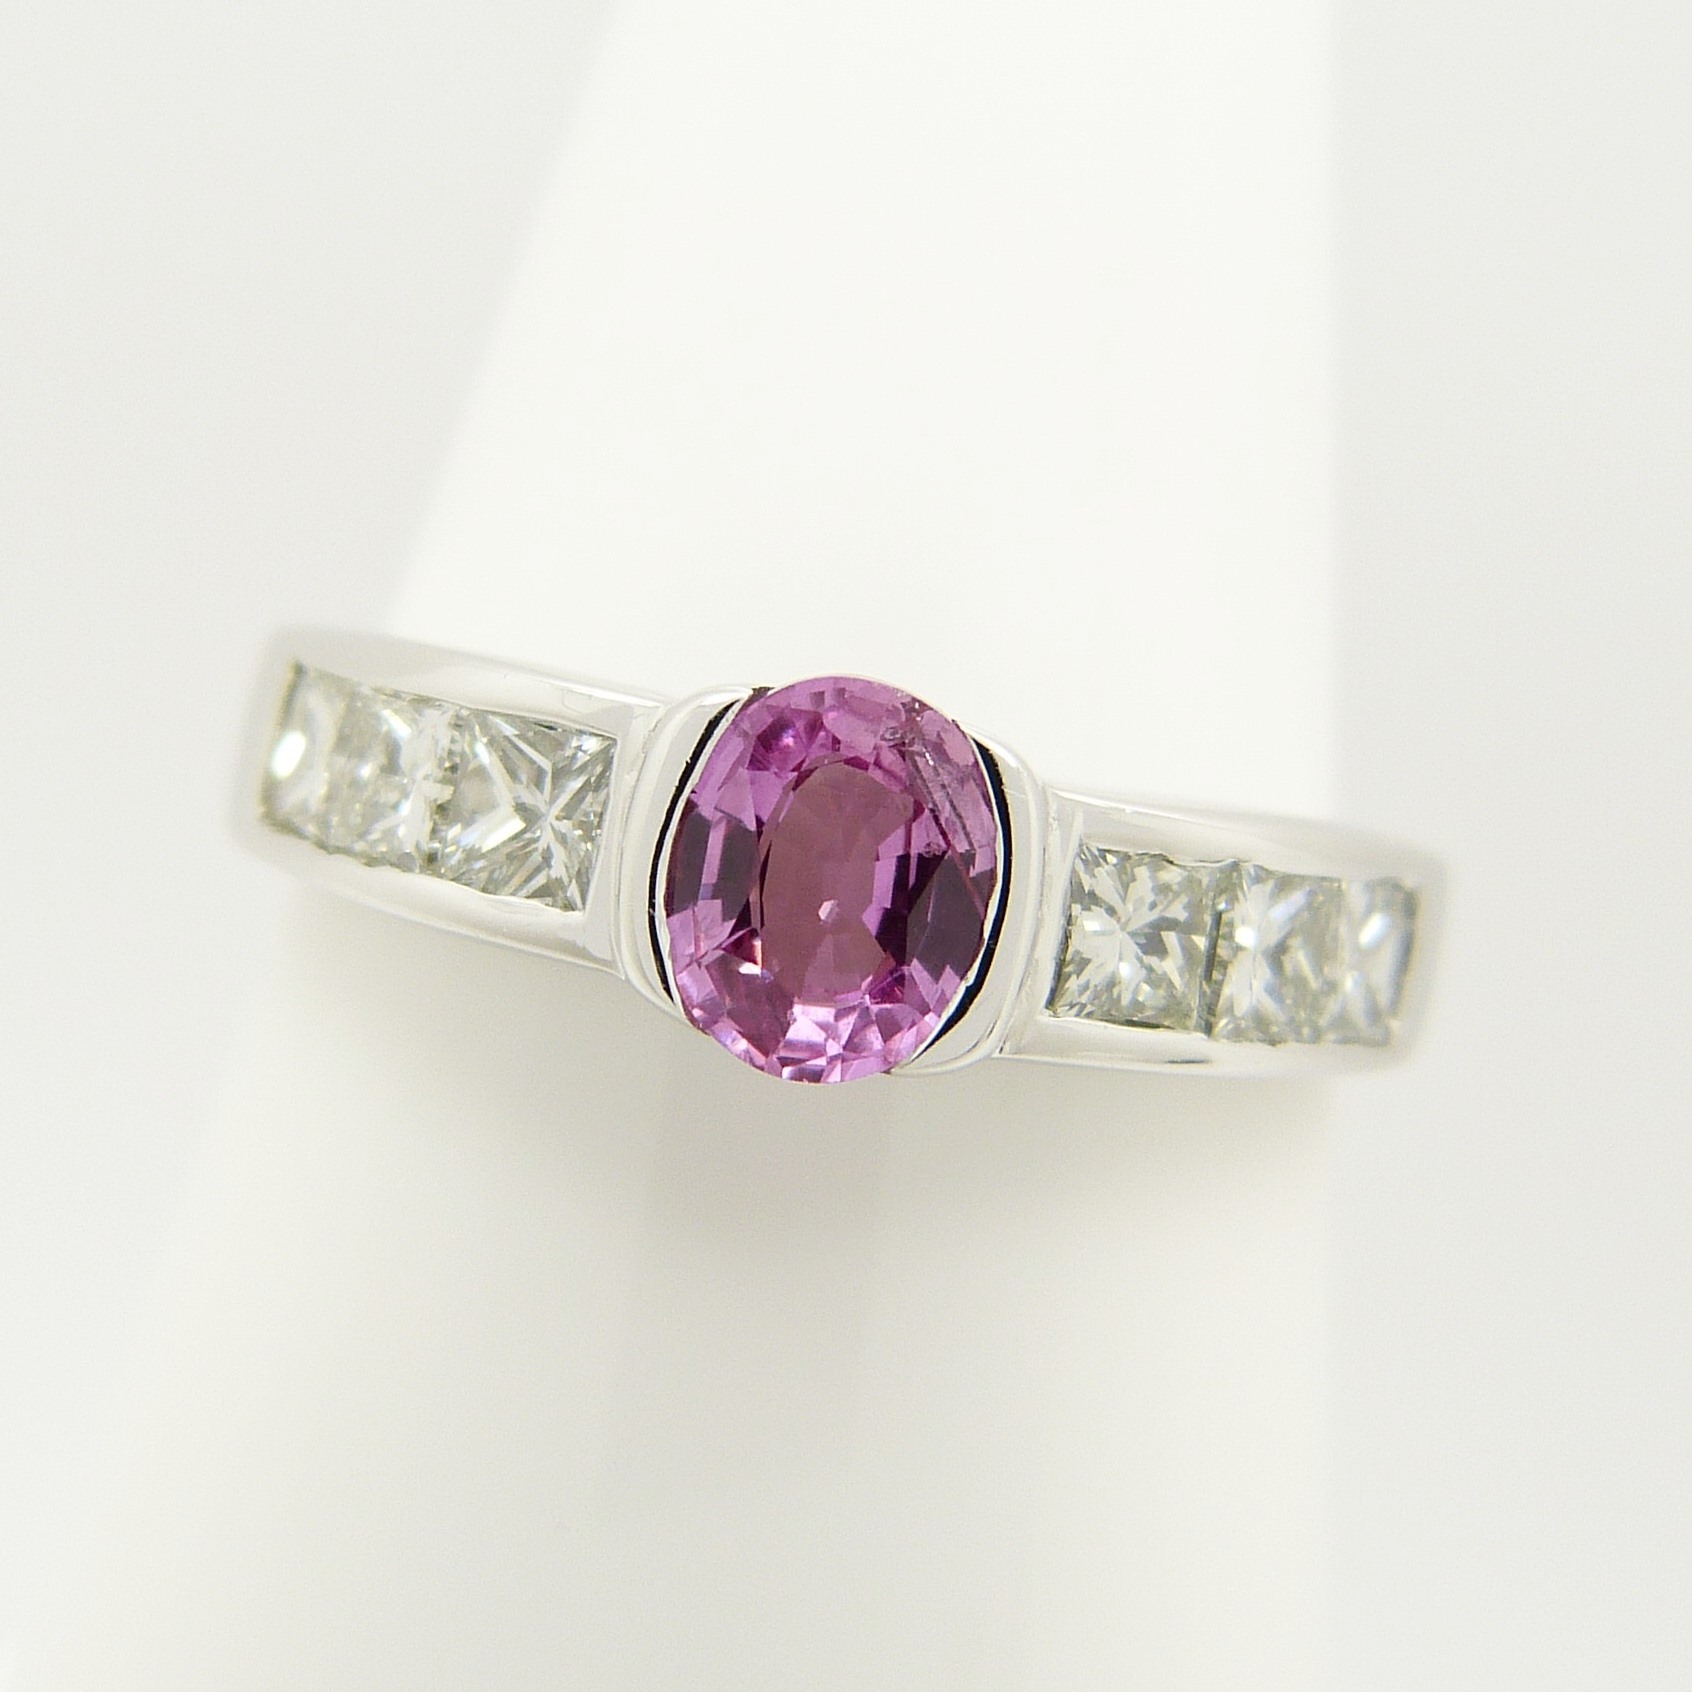 A pink Sapphire gemstone and princess-cut Diamond ring in 18ct white Gold - Image 2 of 7